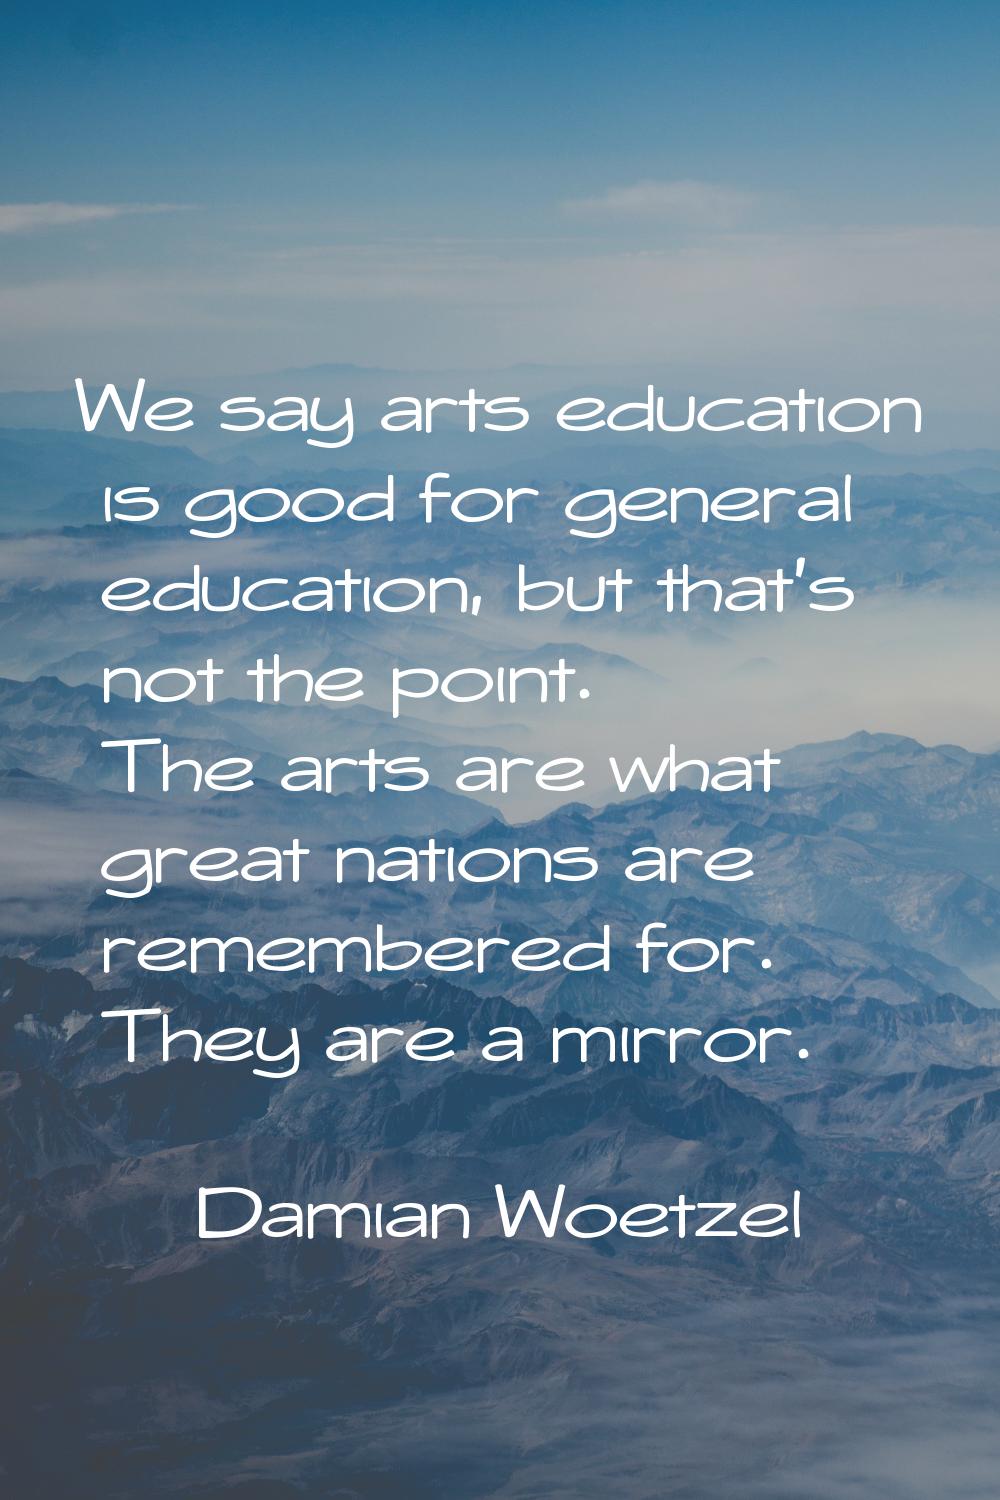 We say arts education is good for general education, but that's not the point. The arts are what gr